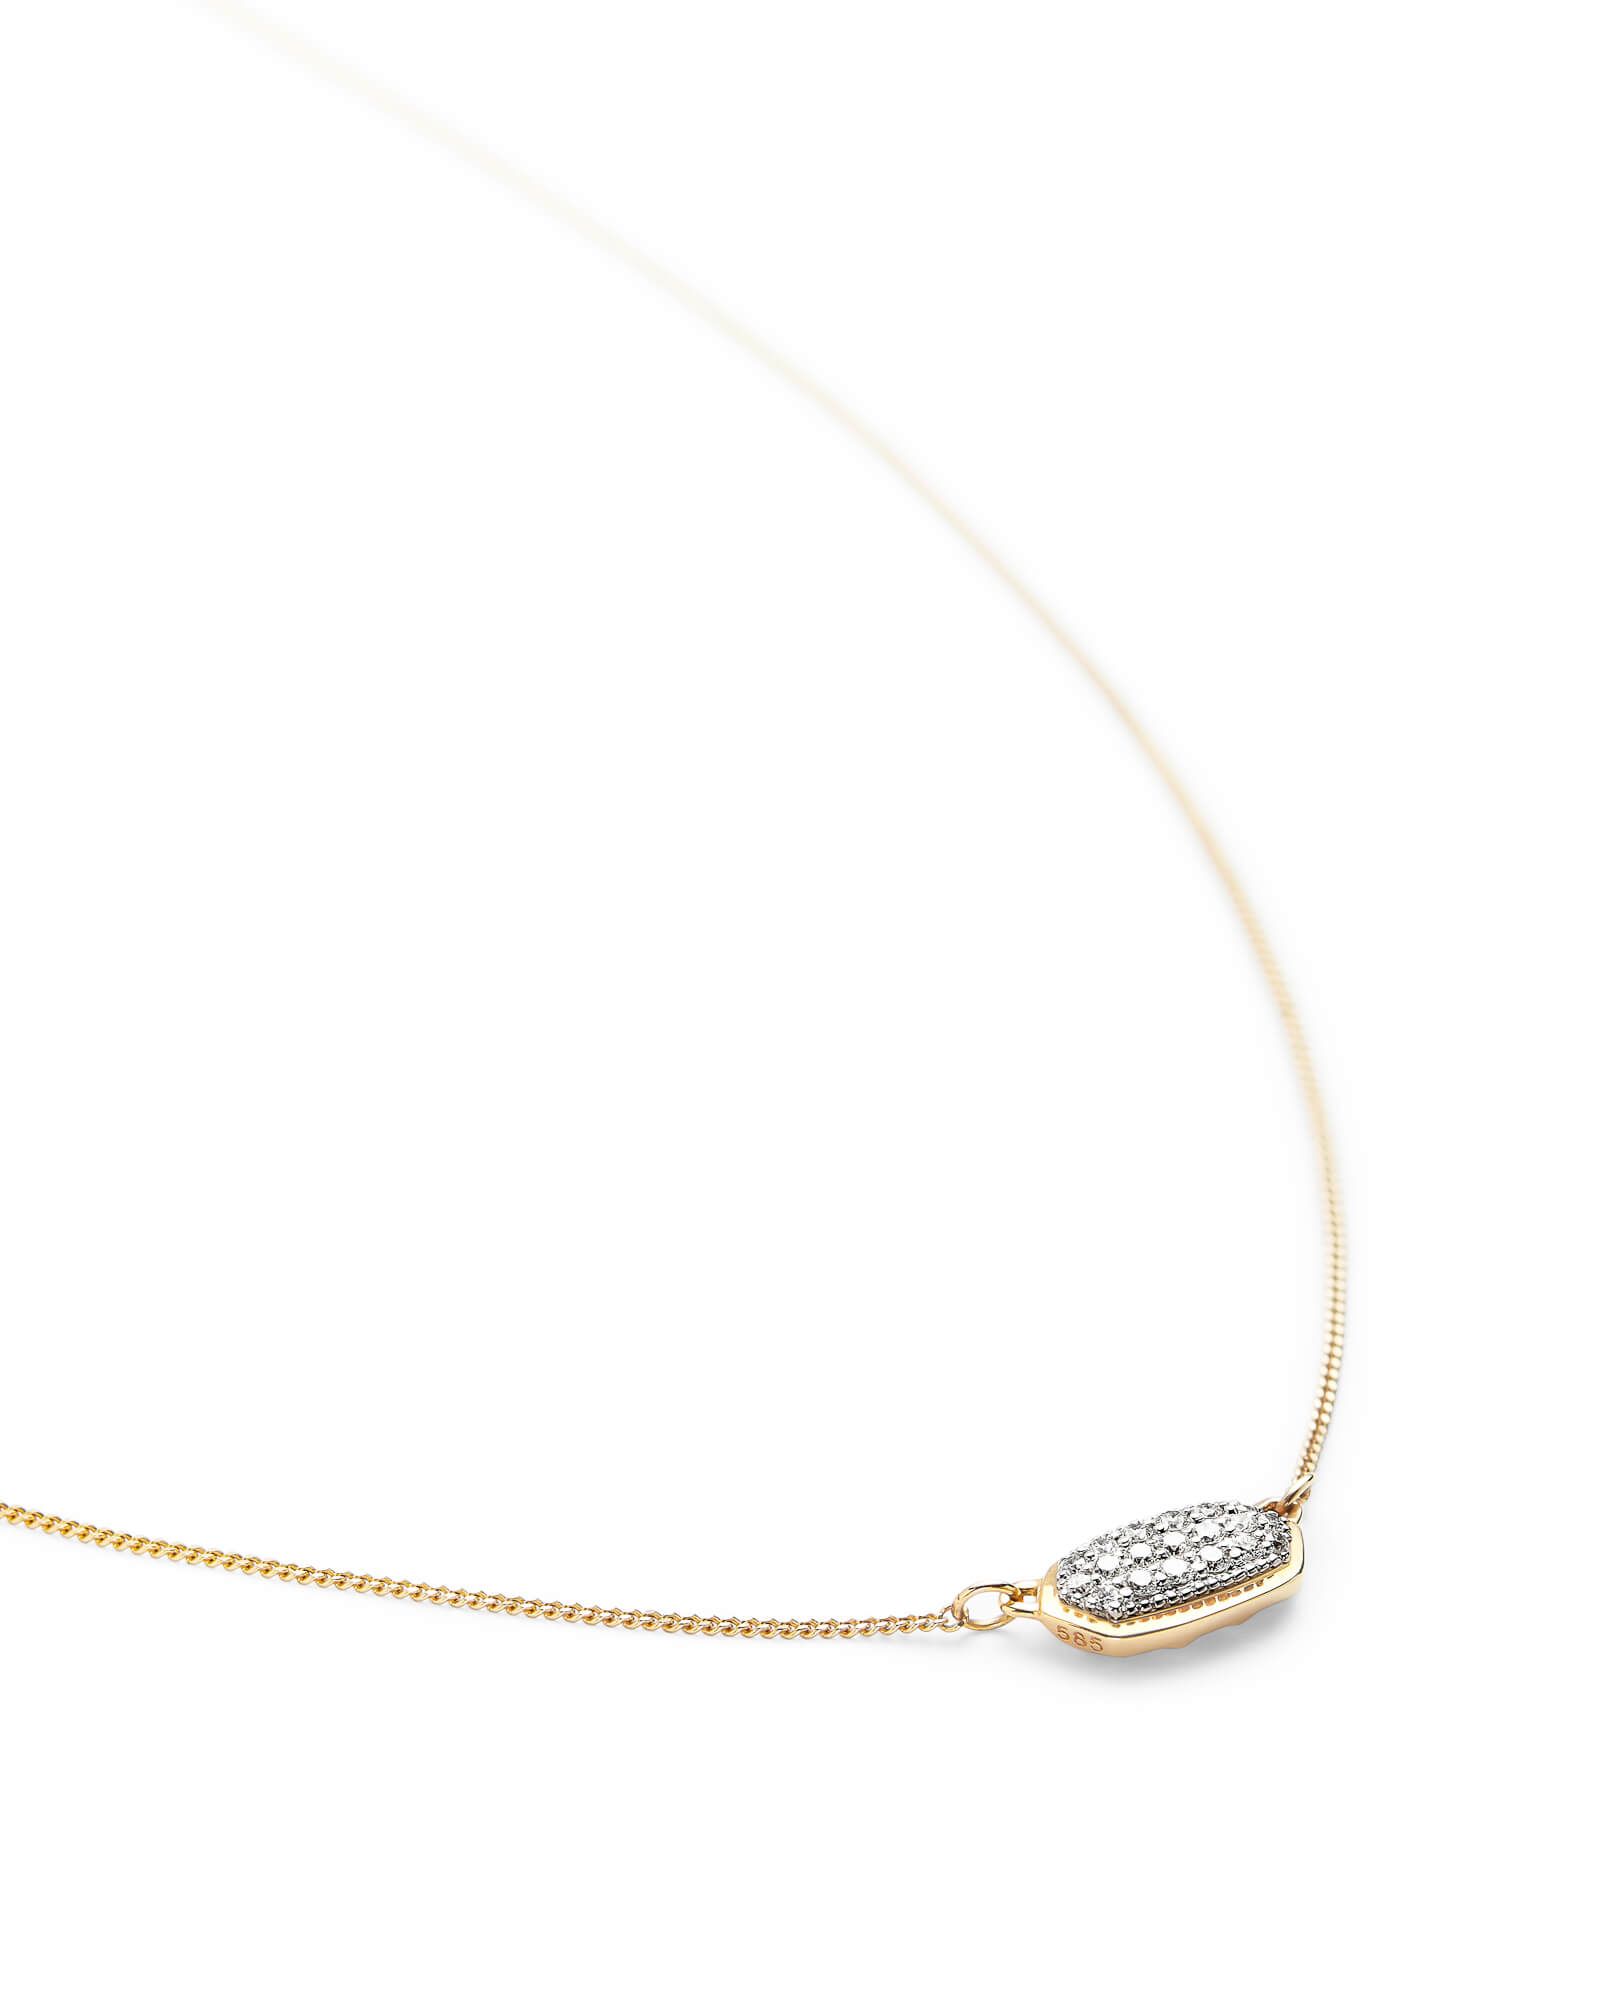 Lisa Pendant Necklace in Pave Diamond and 14k Yellow Gold | Kendra Scott